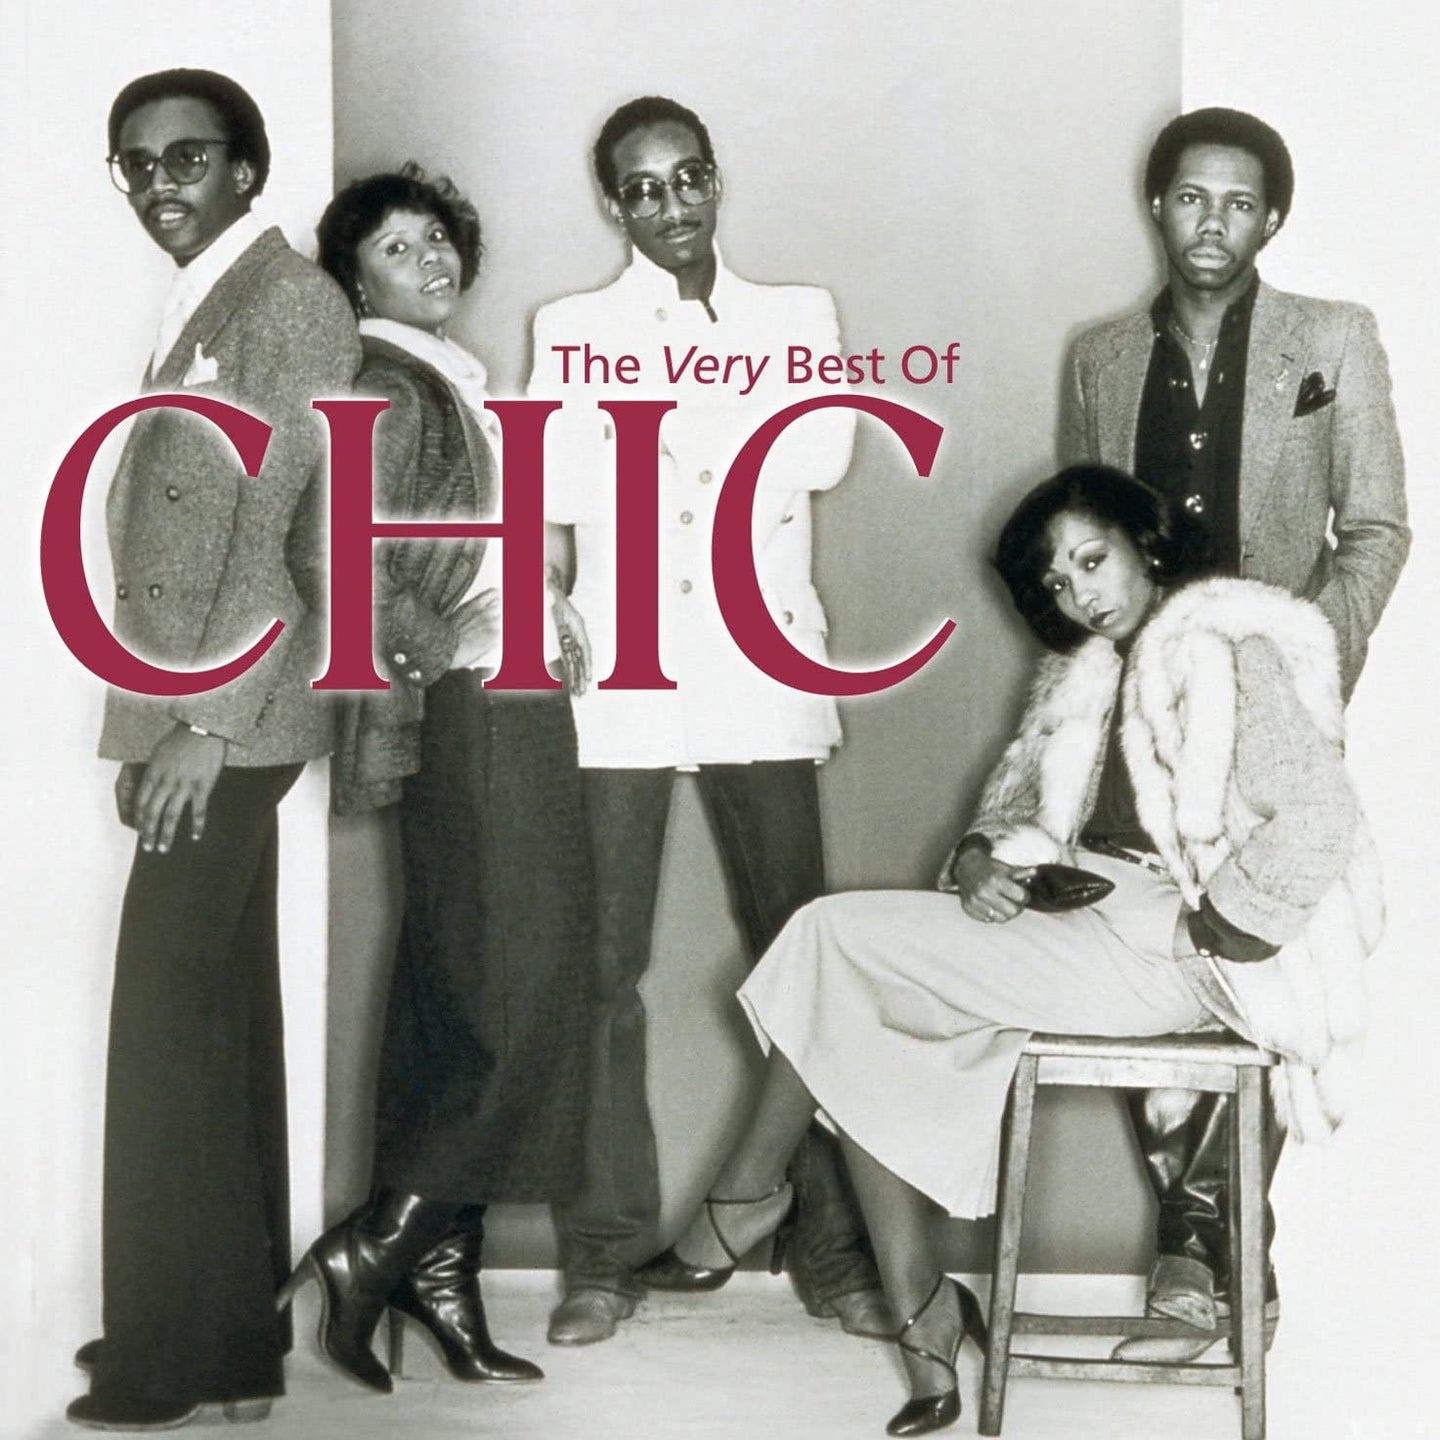 The Very Best Of Chic (Re-Service)